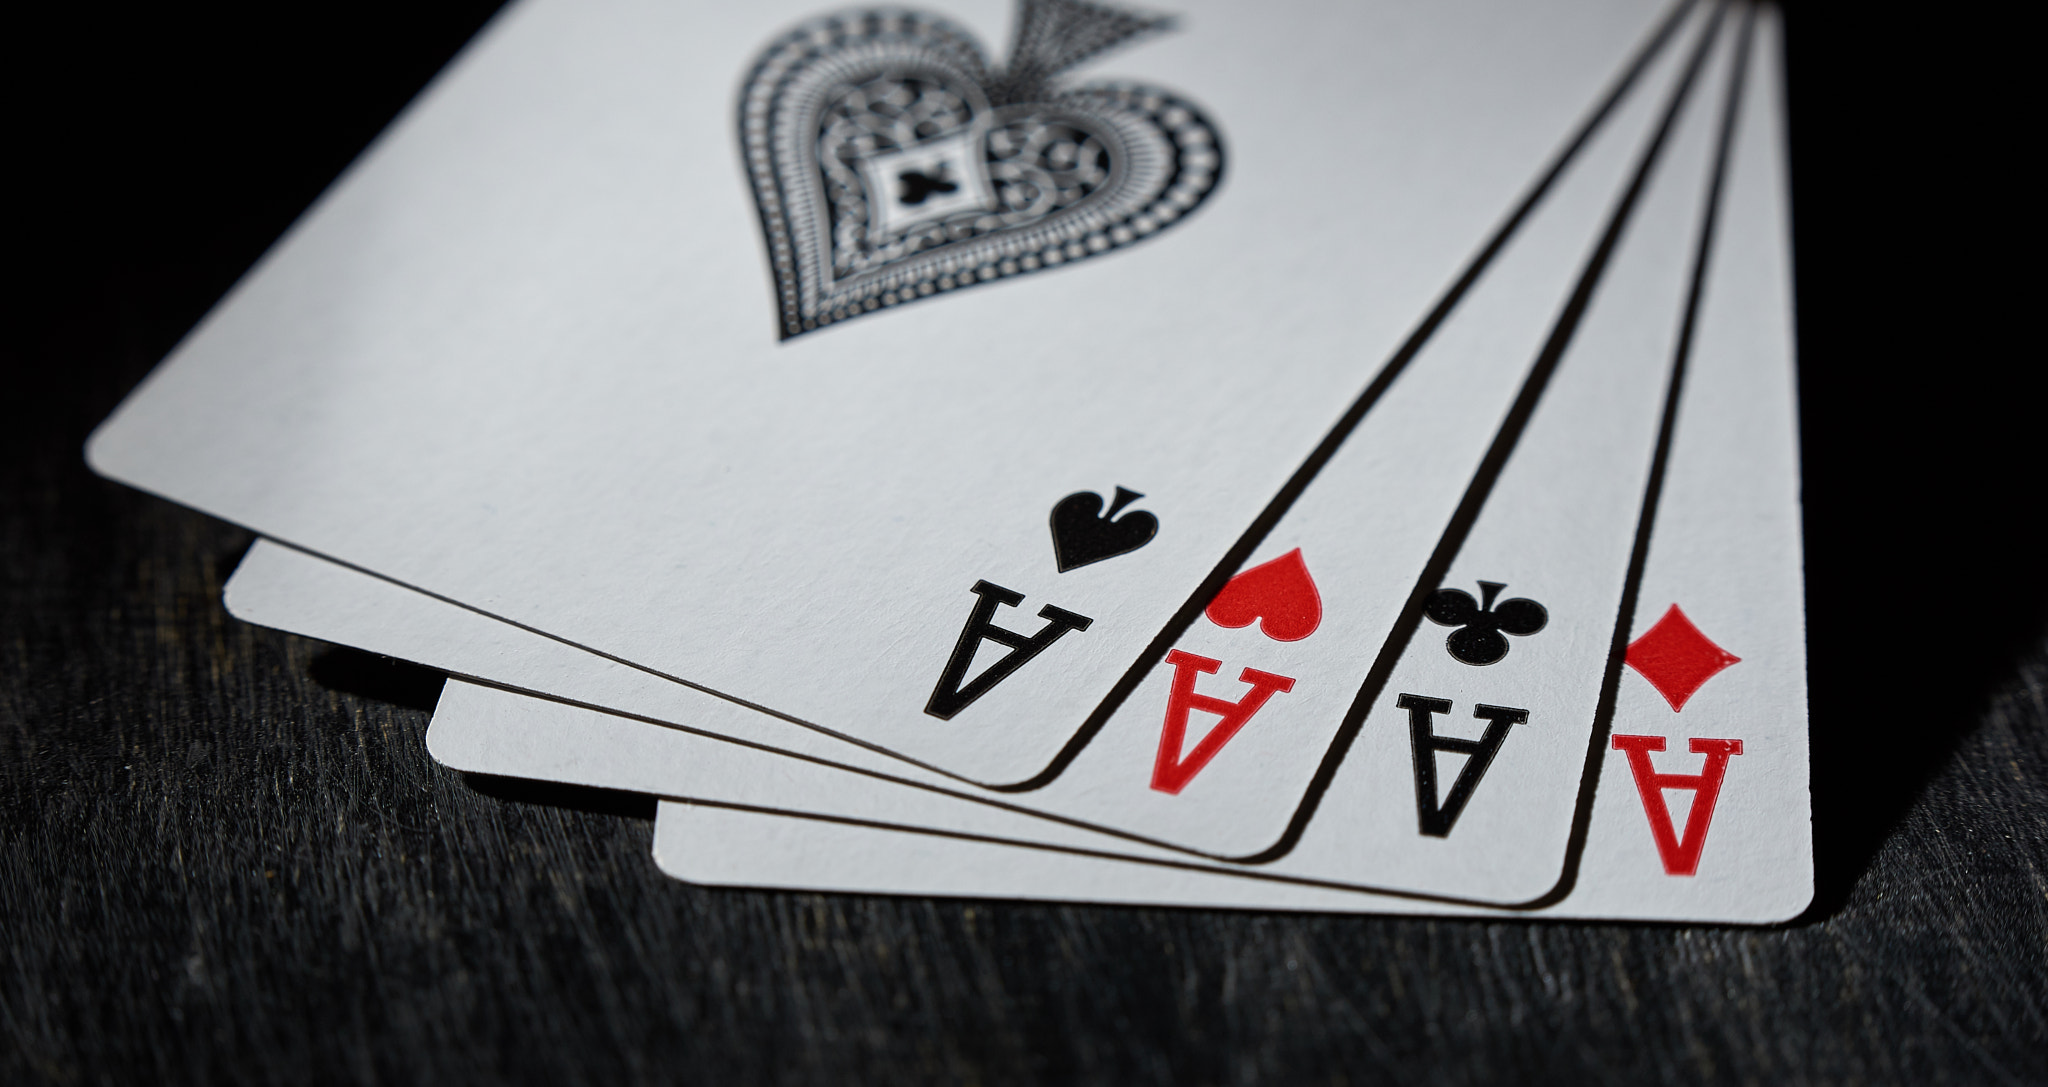 Playing card. Four aces close-up on a black background.